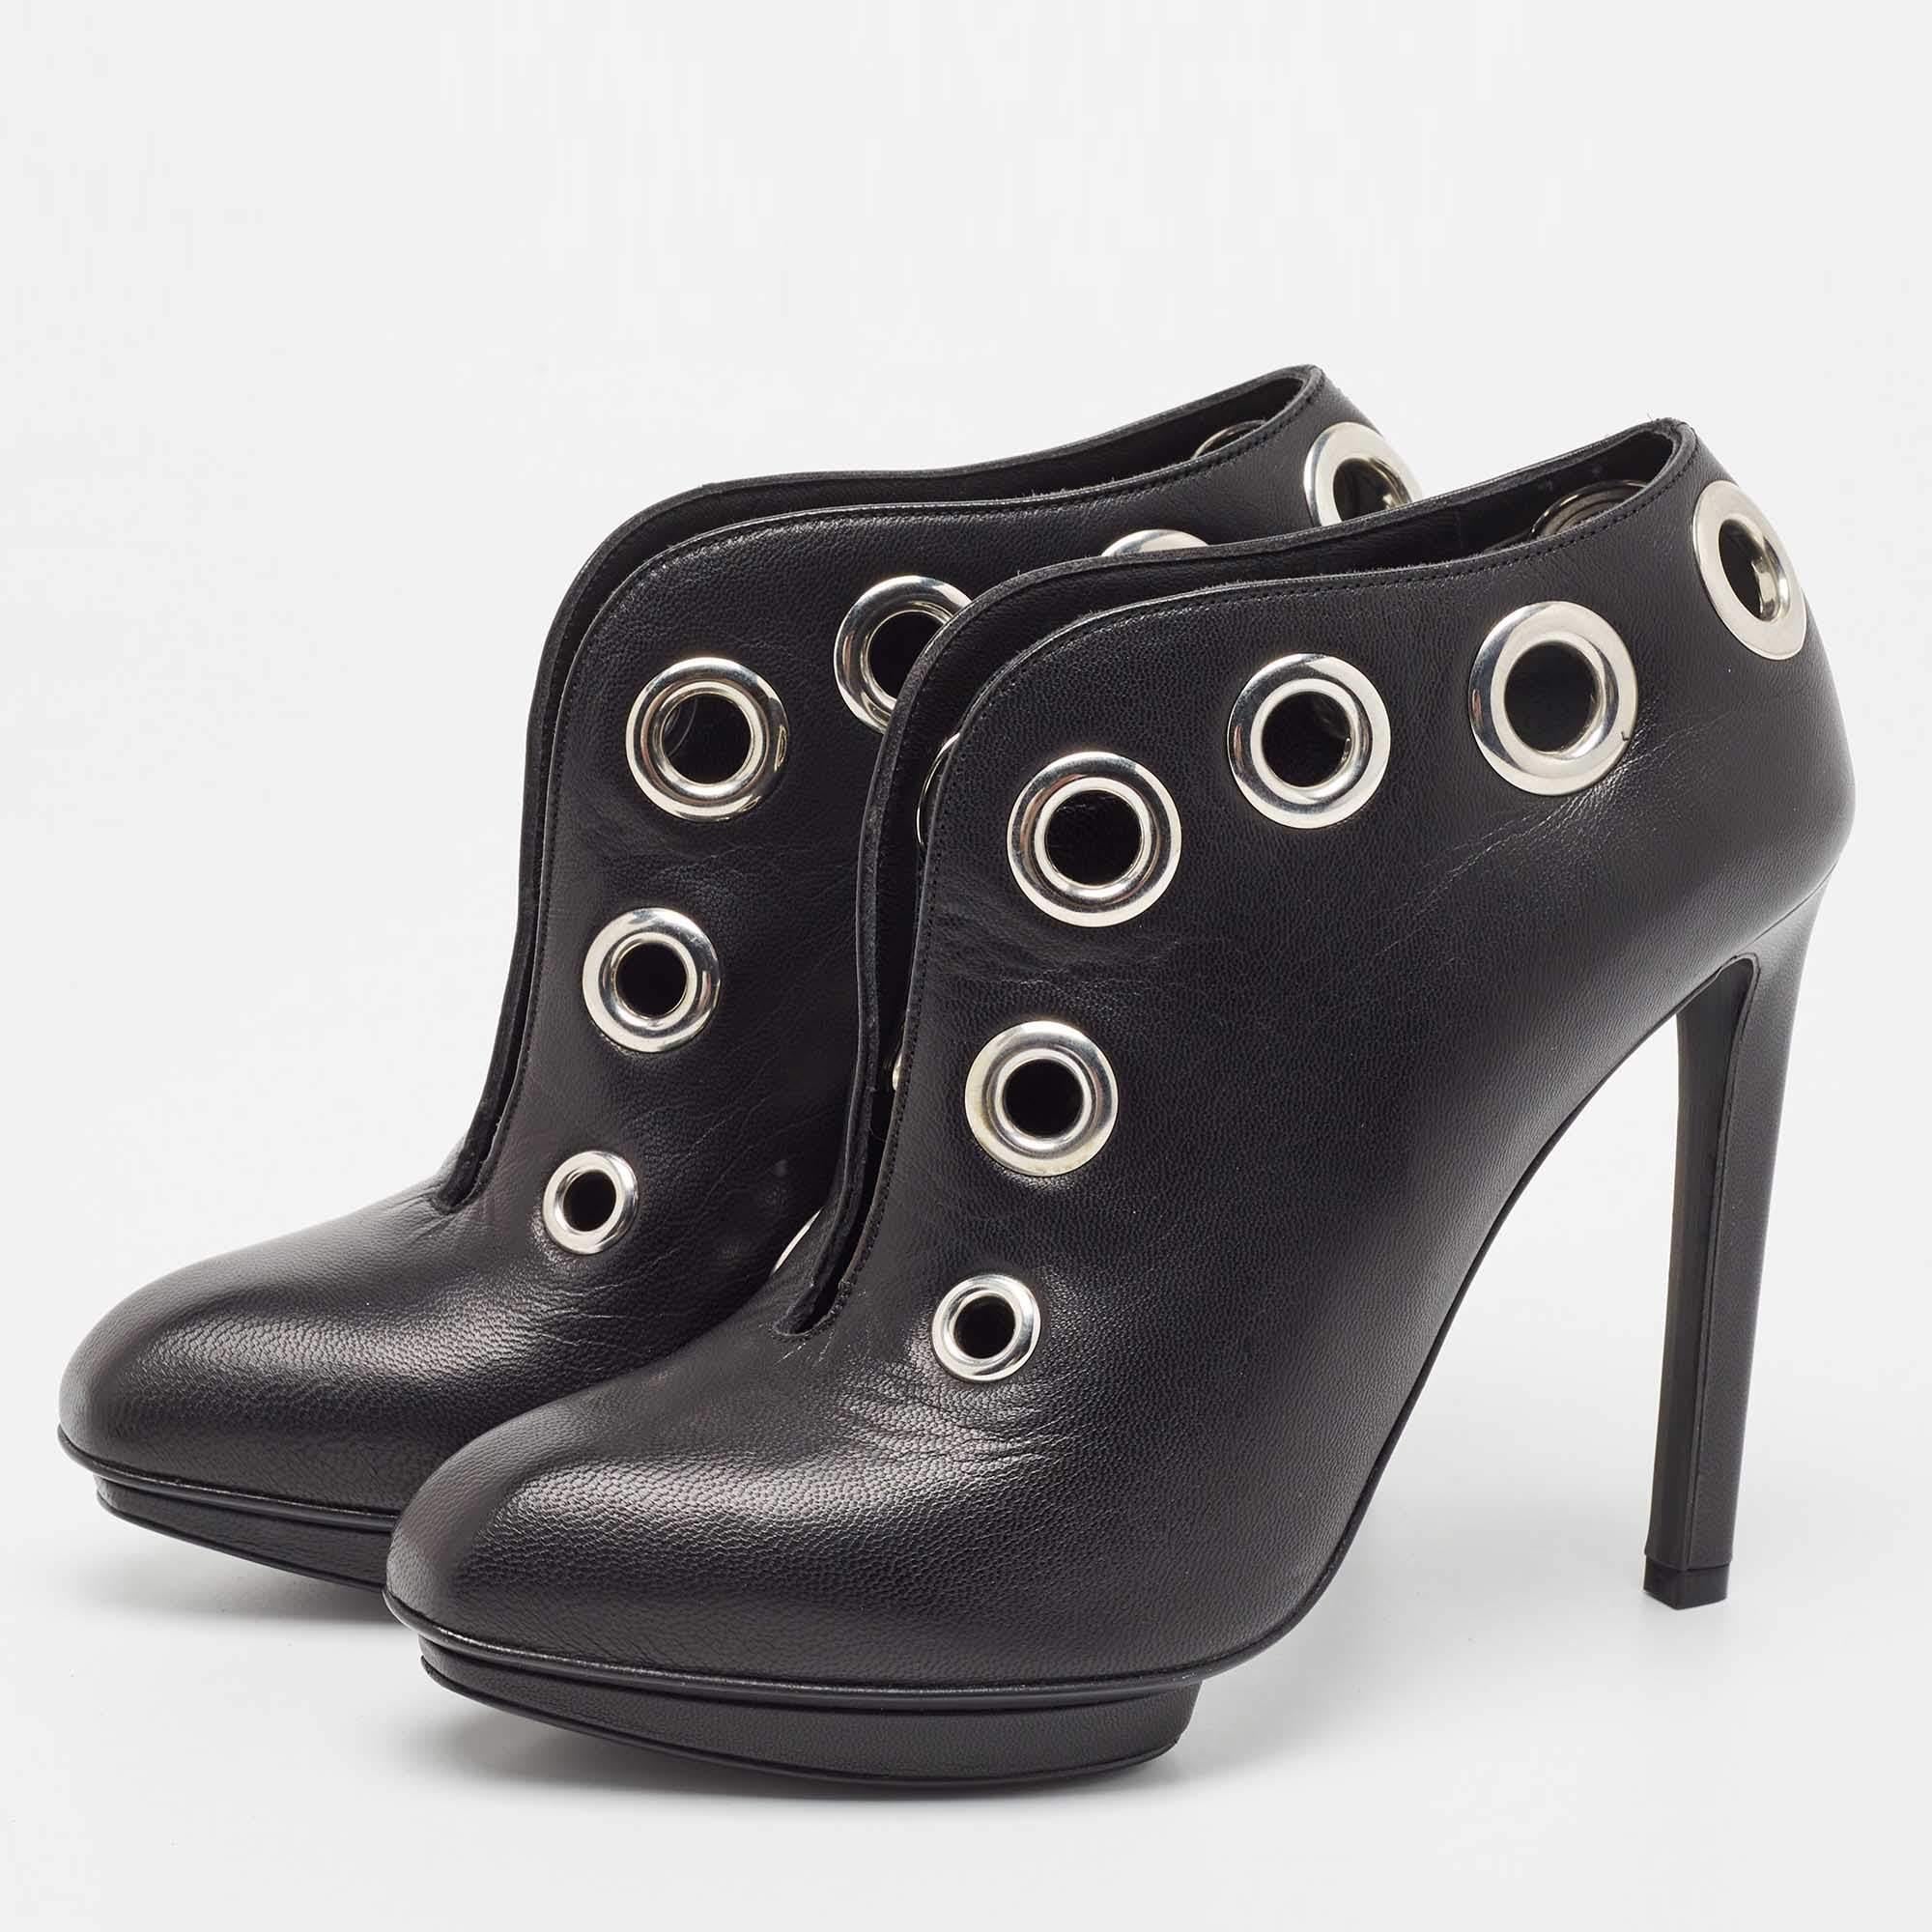 Alexander McQueen Black Leather Eyelet Embellished Ankle Booties Size 36 1